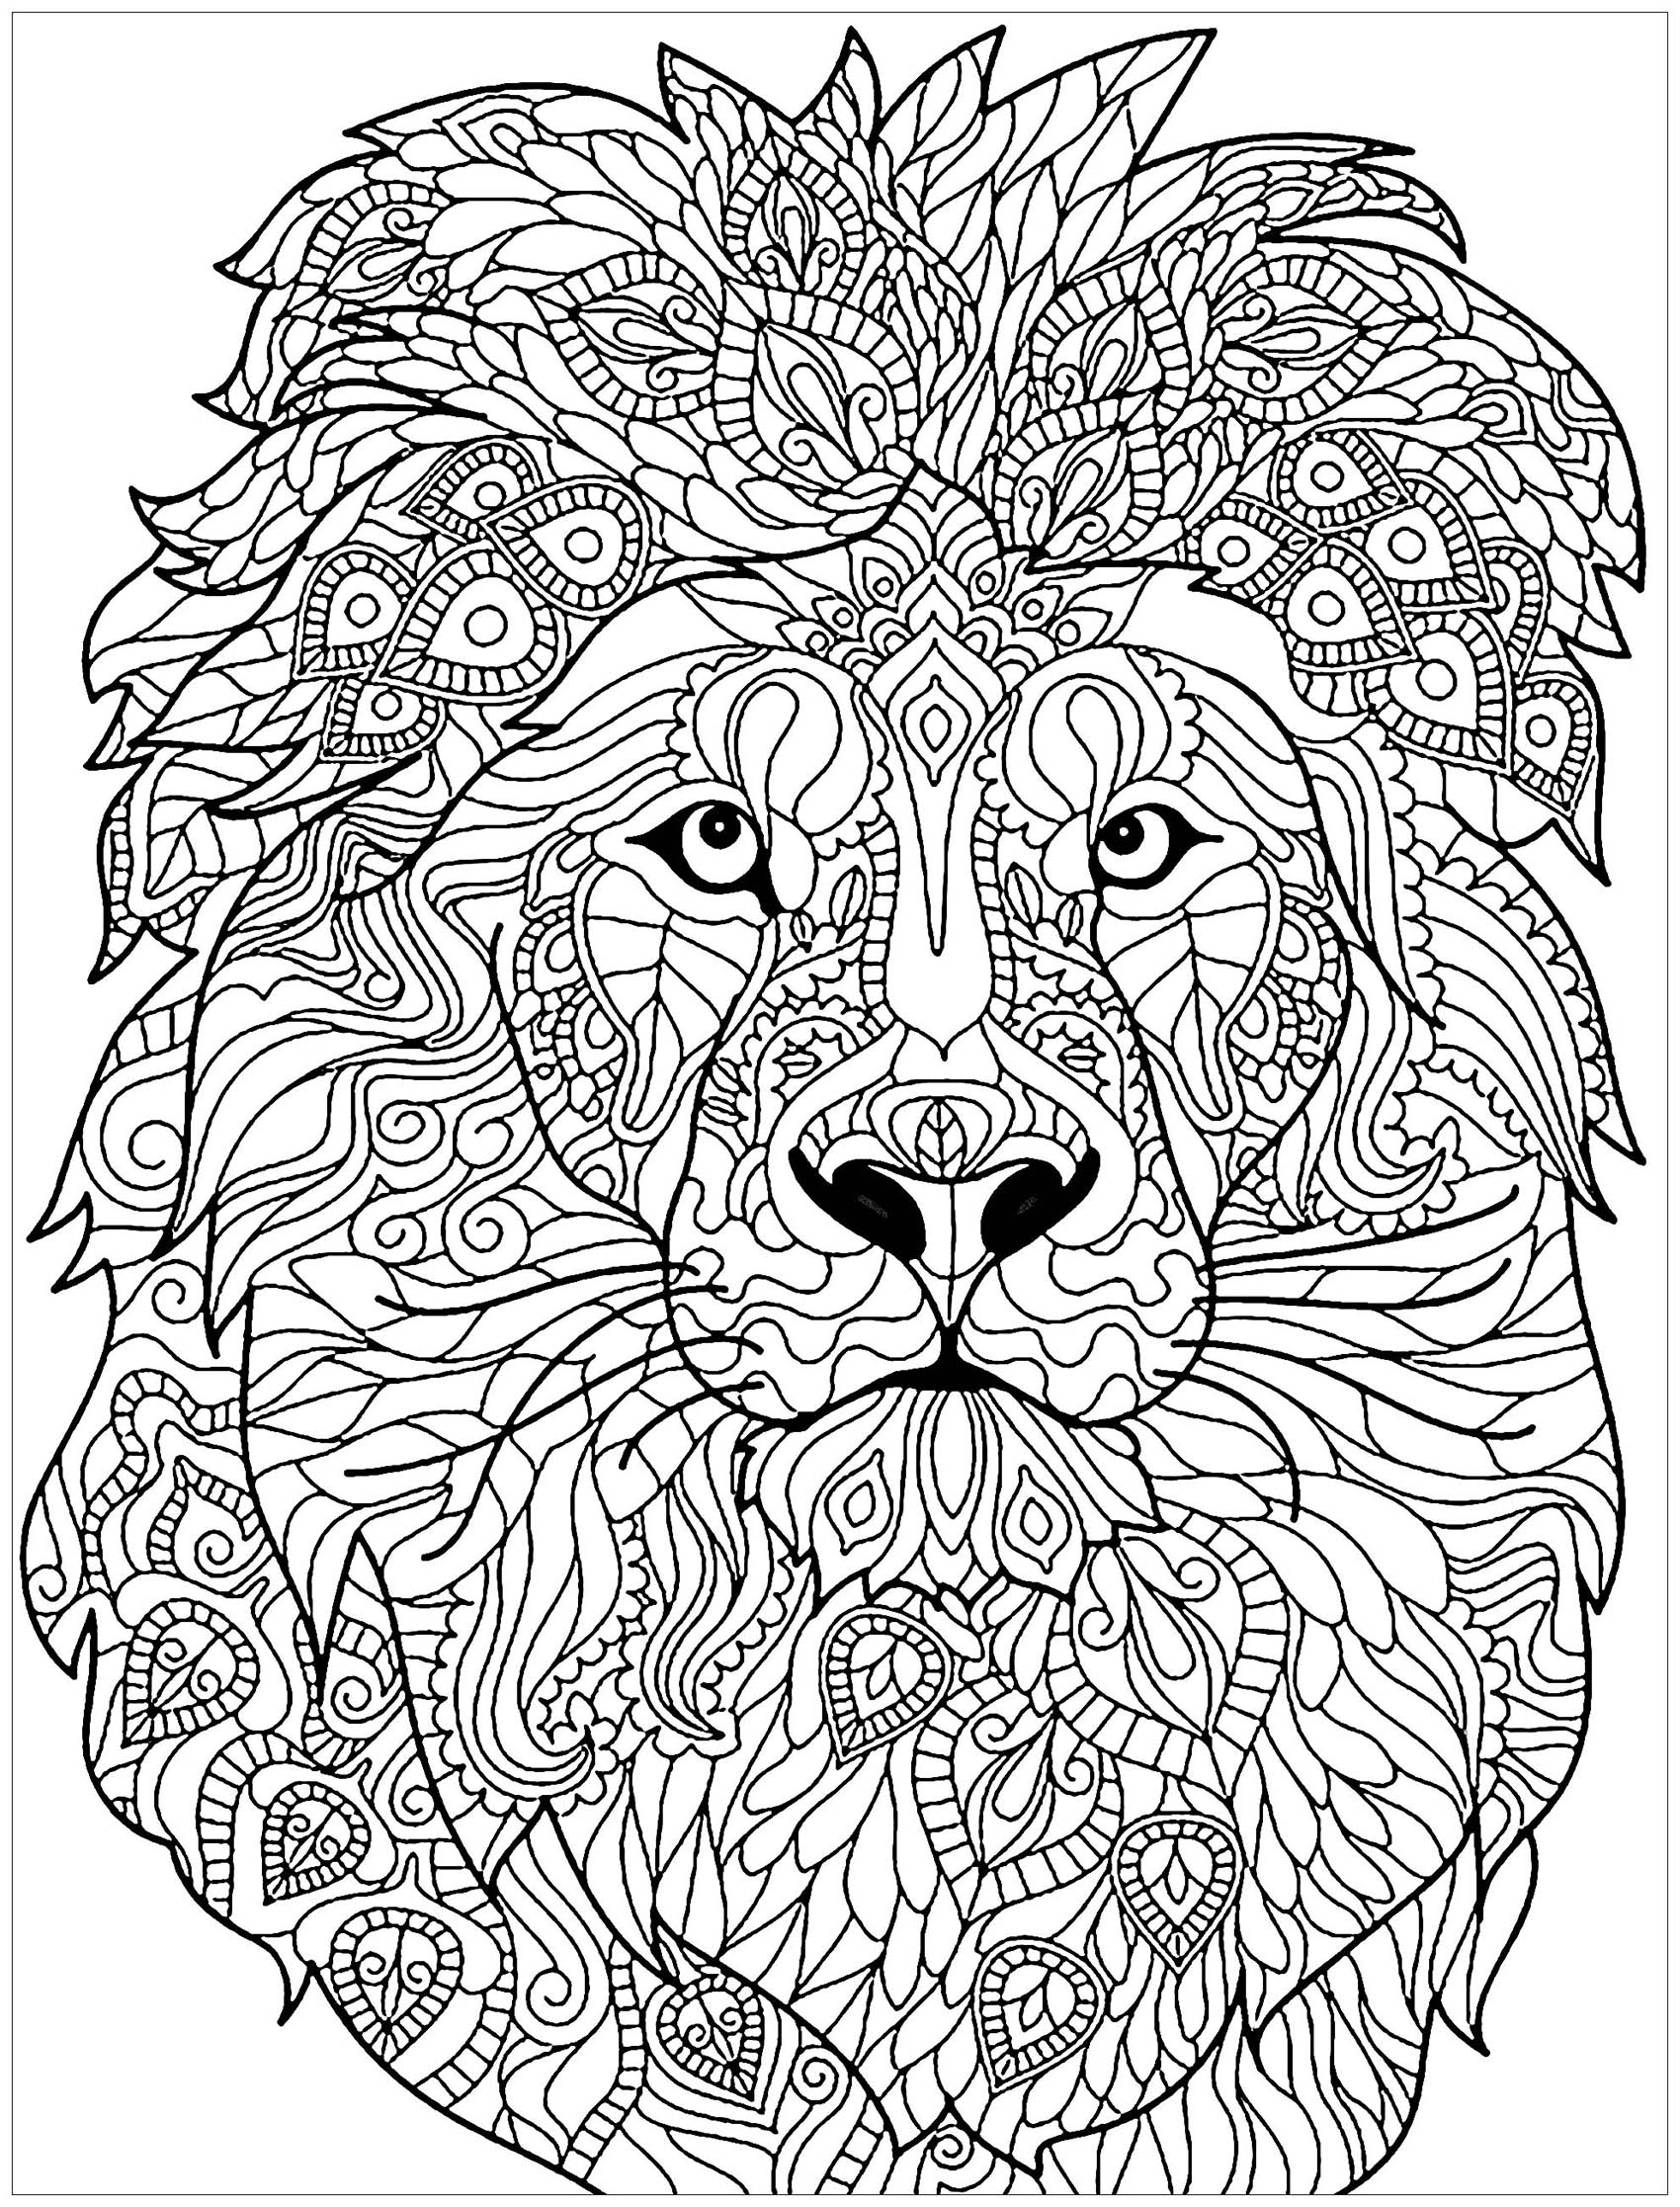 lion-head-with-complex-patterns-to-color-lion-kids-coloring-pages